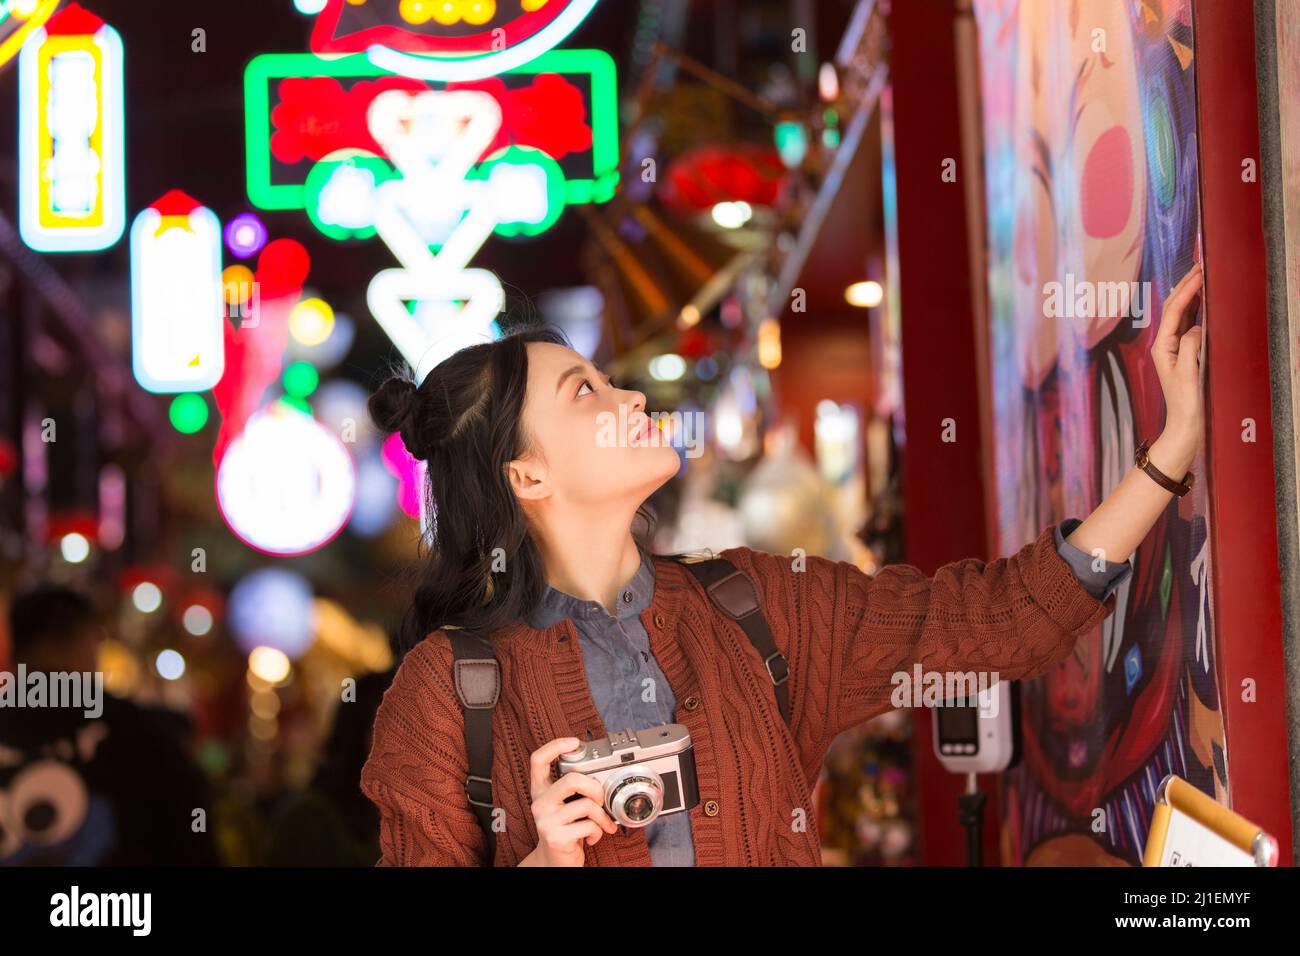 Young female college student admiring art poster at a night market in Beijing - stock photo Stock Photo